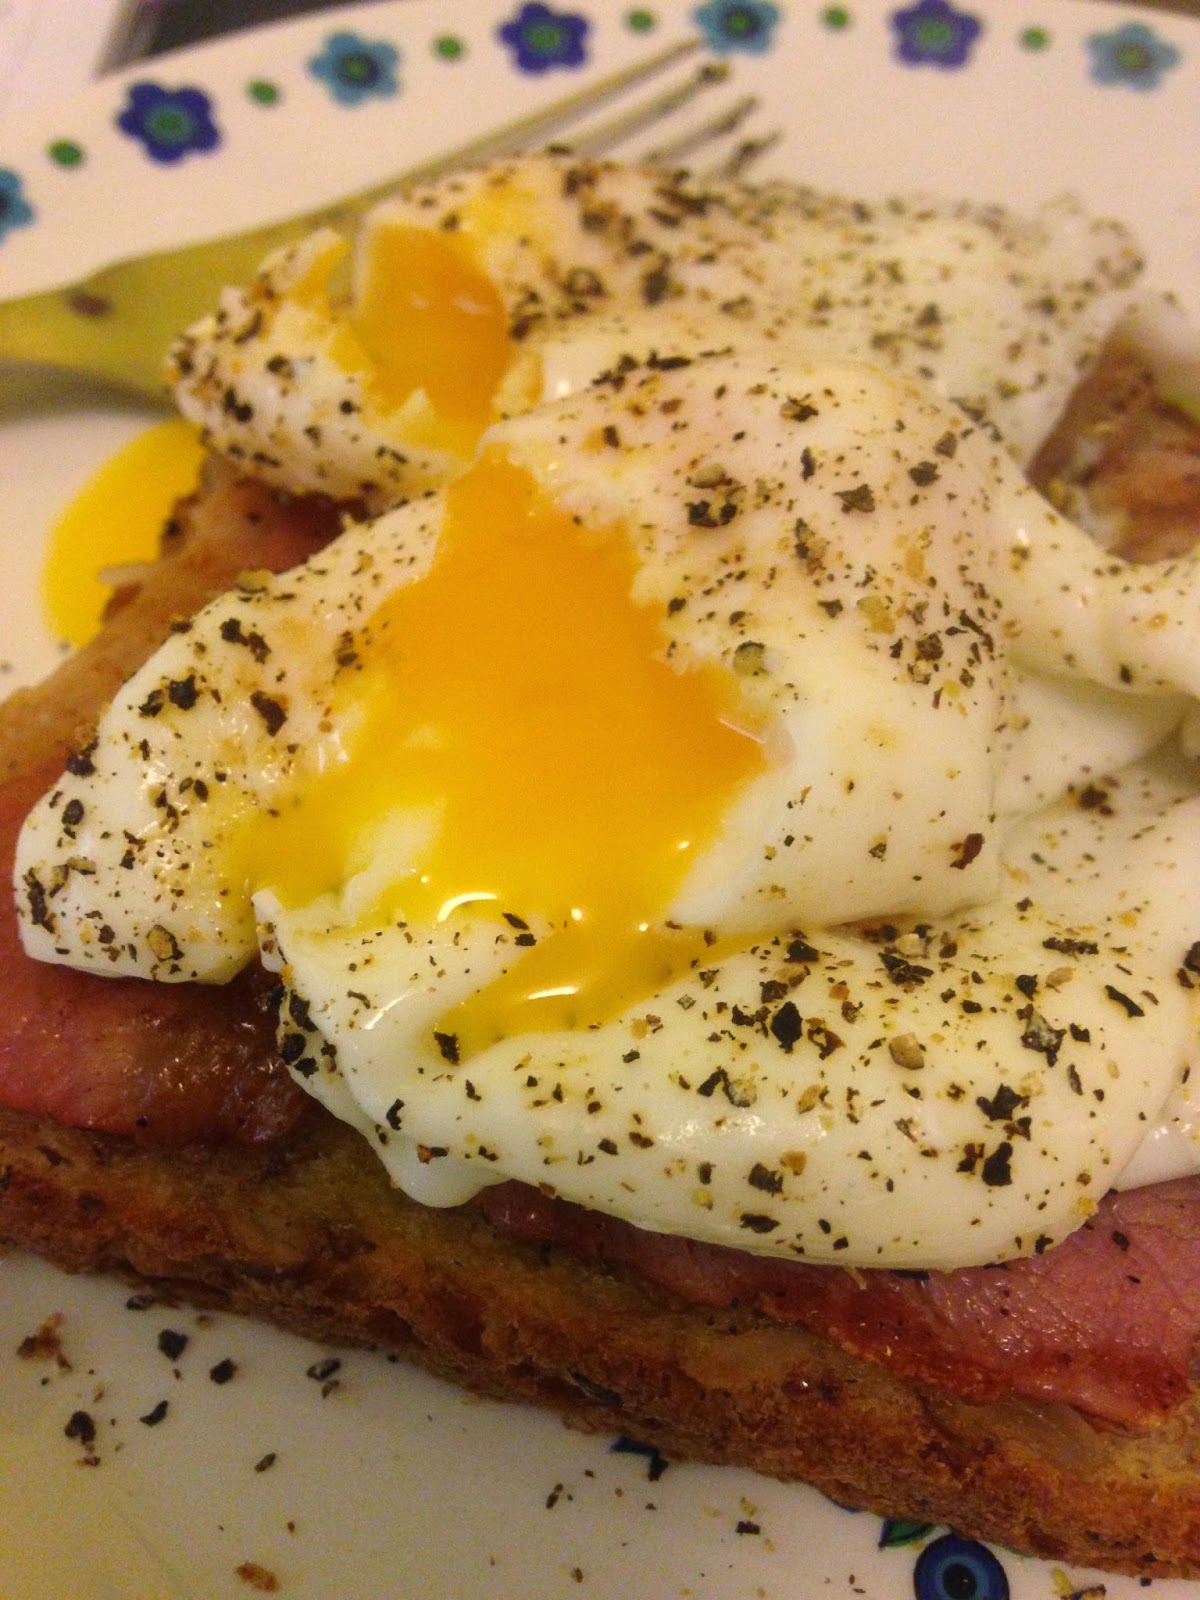 Bacon and eggs on Vogel's toast